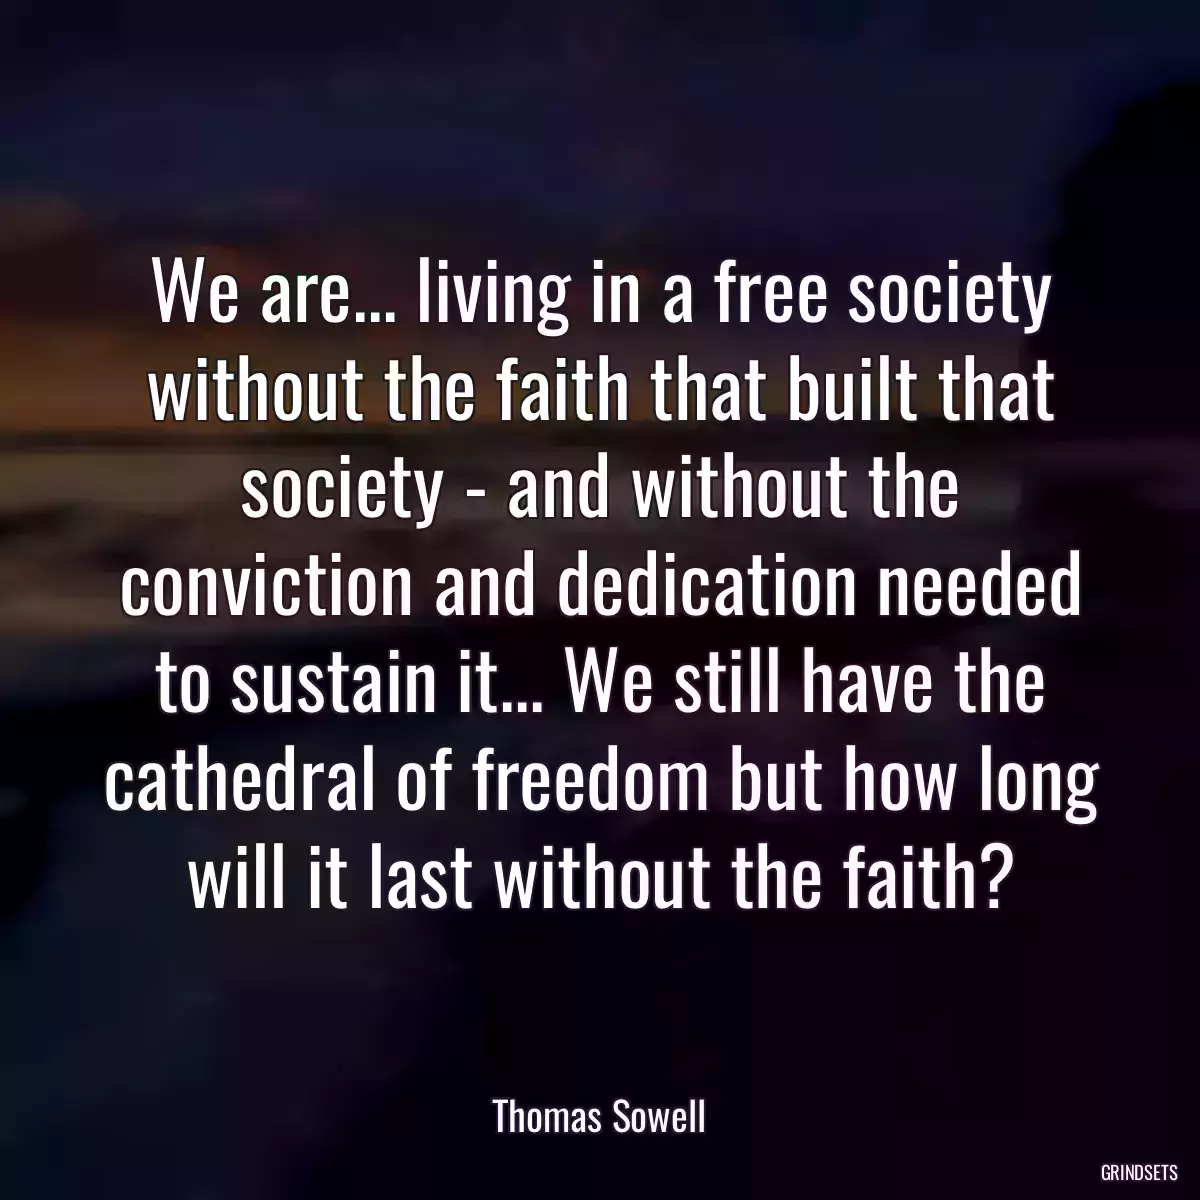 We are... living in a free society without the faith that built that society - and without the conviction and dedication needed to sustain it... We still have the cathedral of freedom but how long will it last without the faith?